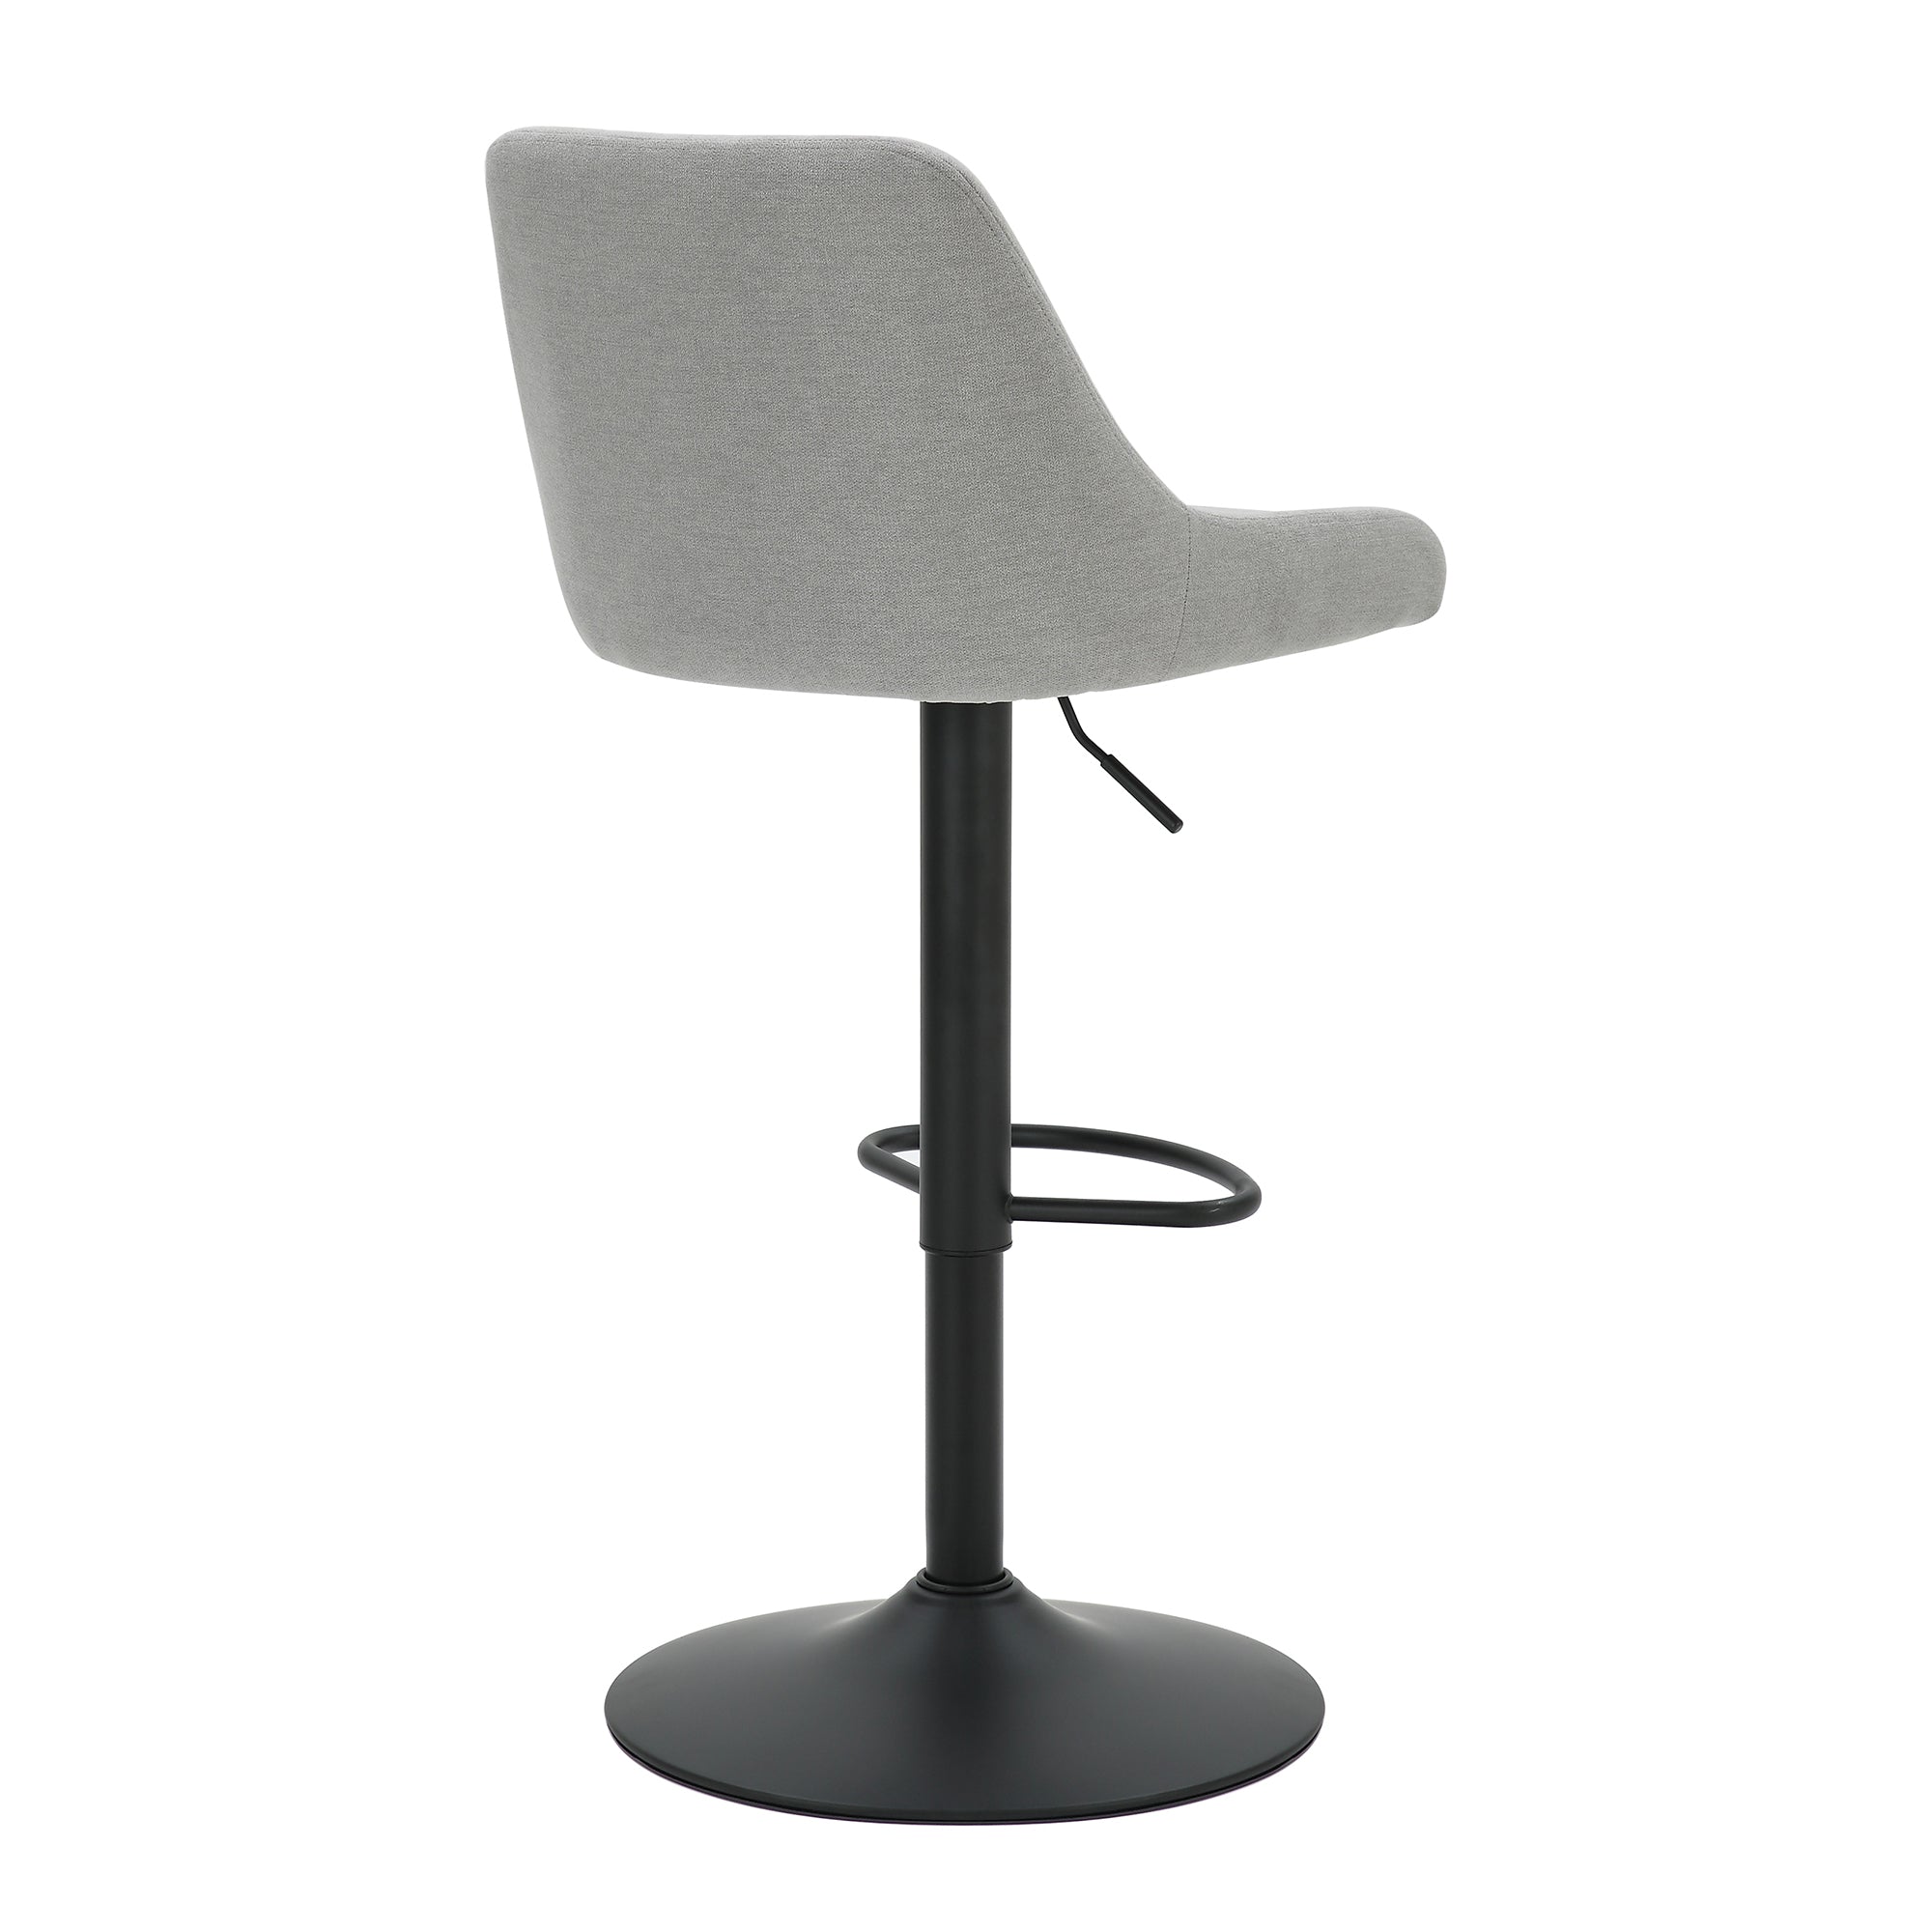 Kron Adjustable Height Air-Lift Swivel Stool, Set of 2, in Grey Fabric 203-574GY